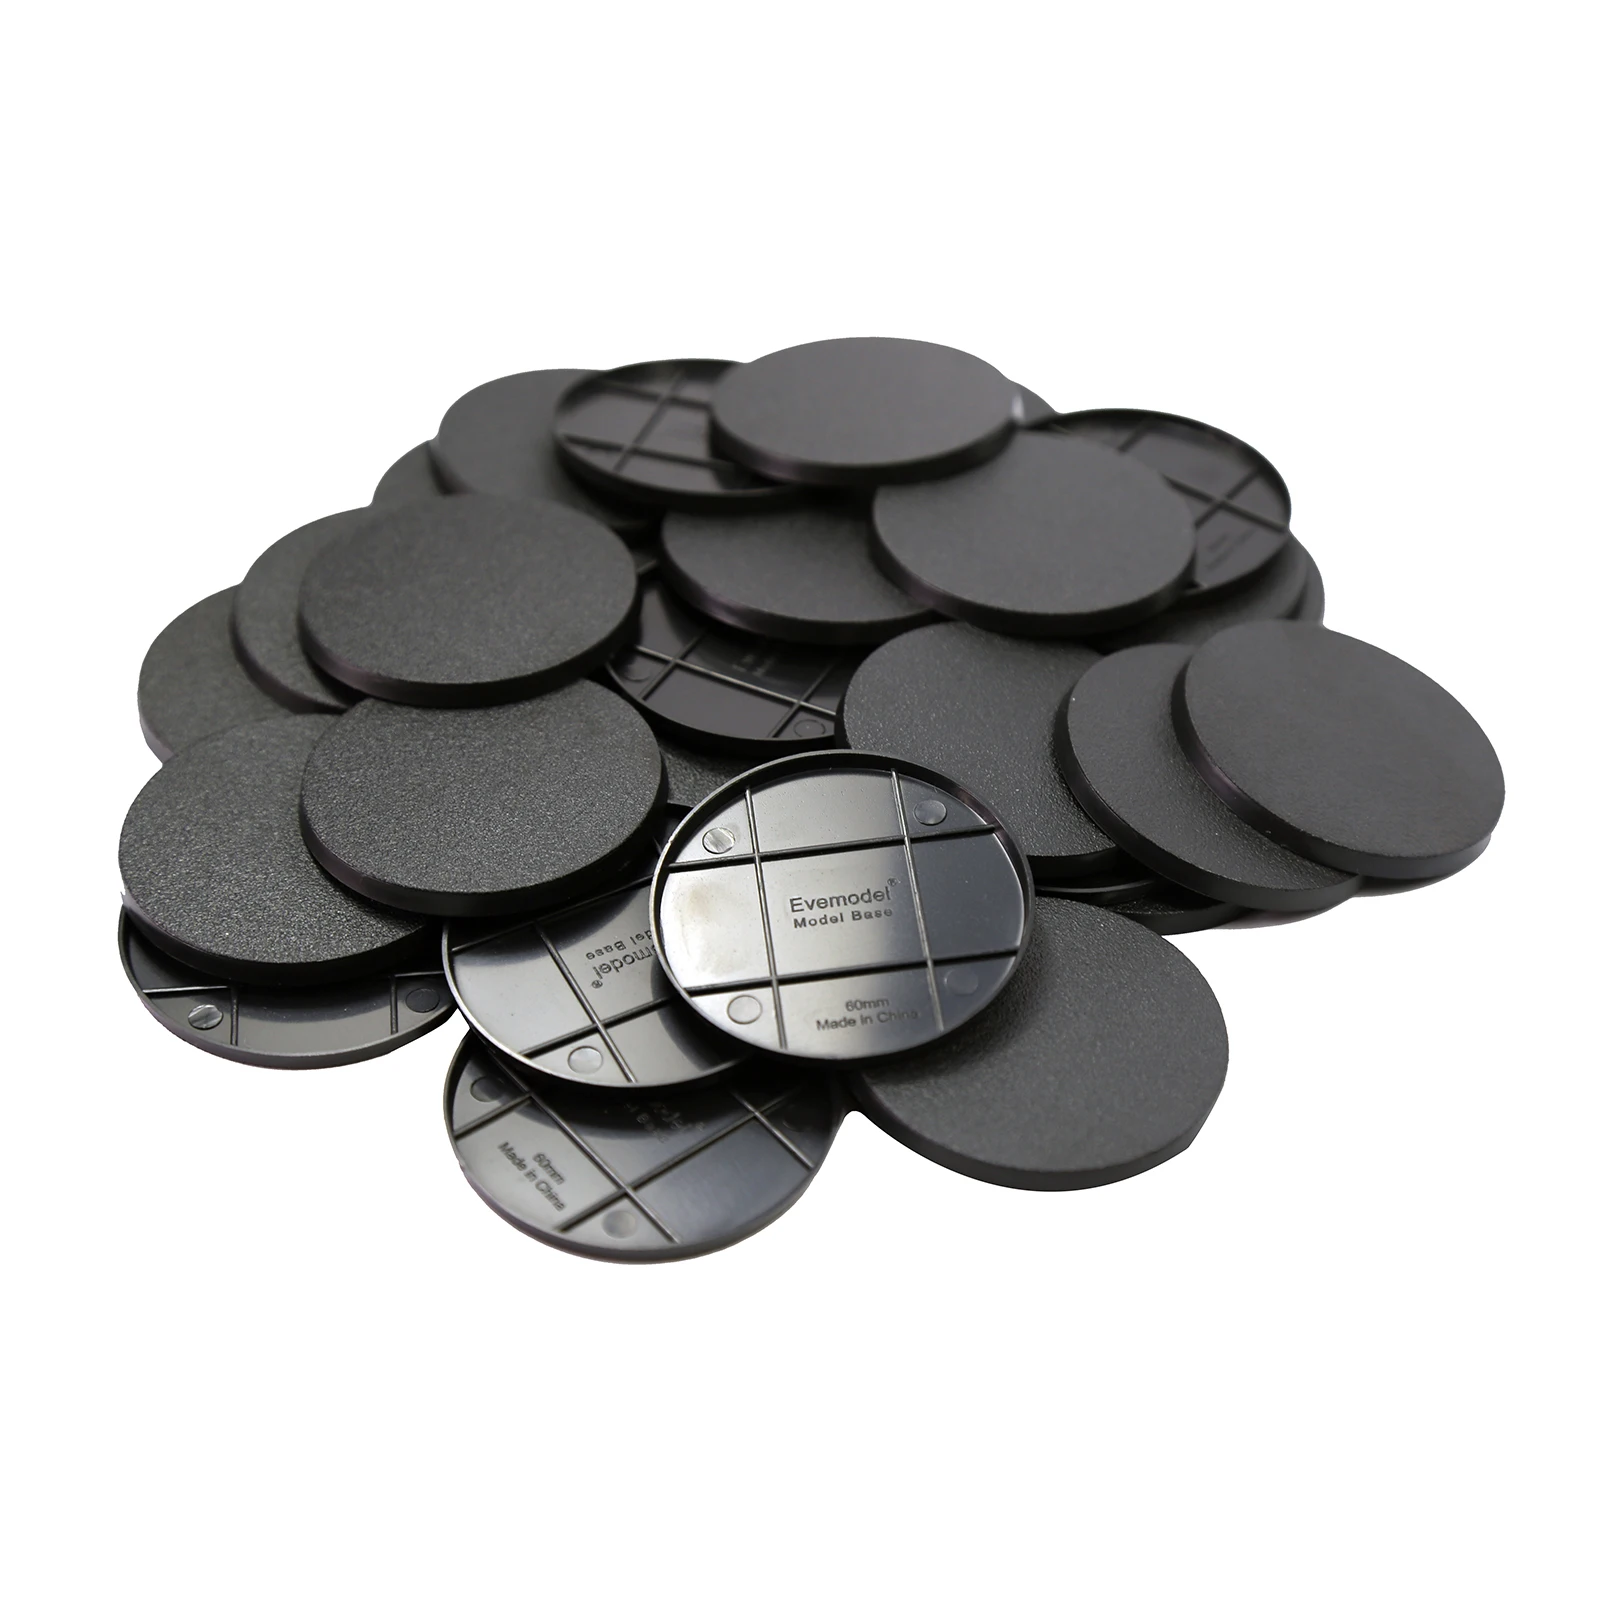 Evemodel 60mm Round Plastic Model Bases MB1160 for Warhammer Gaming Miniatures Action Figure War Game